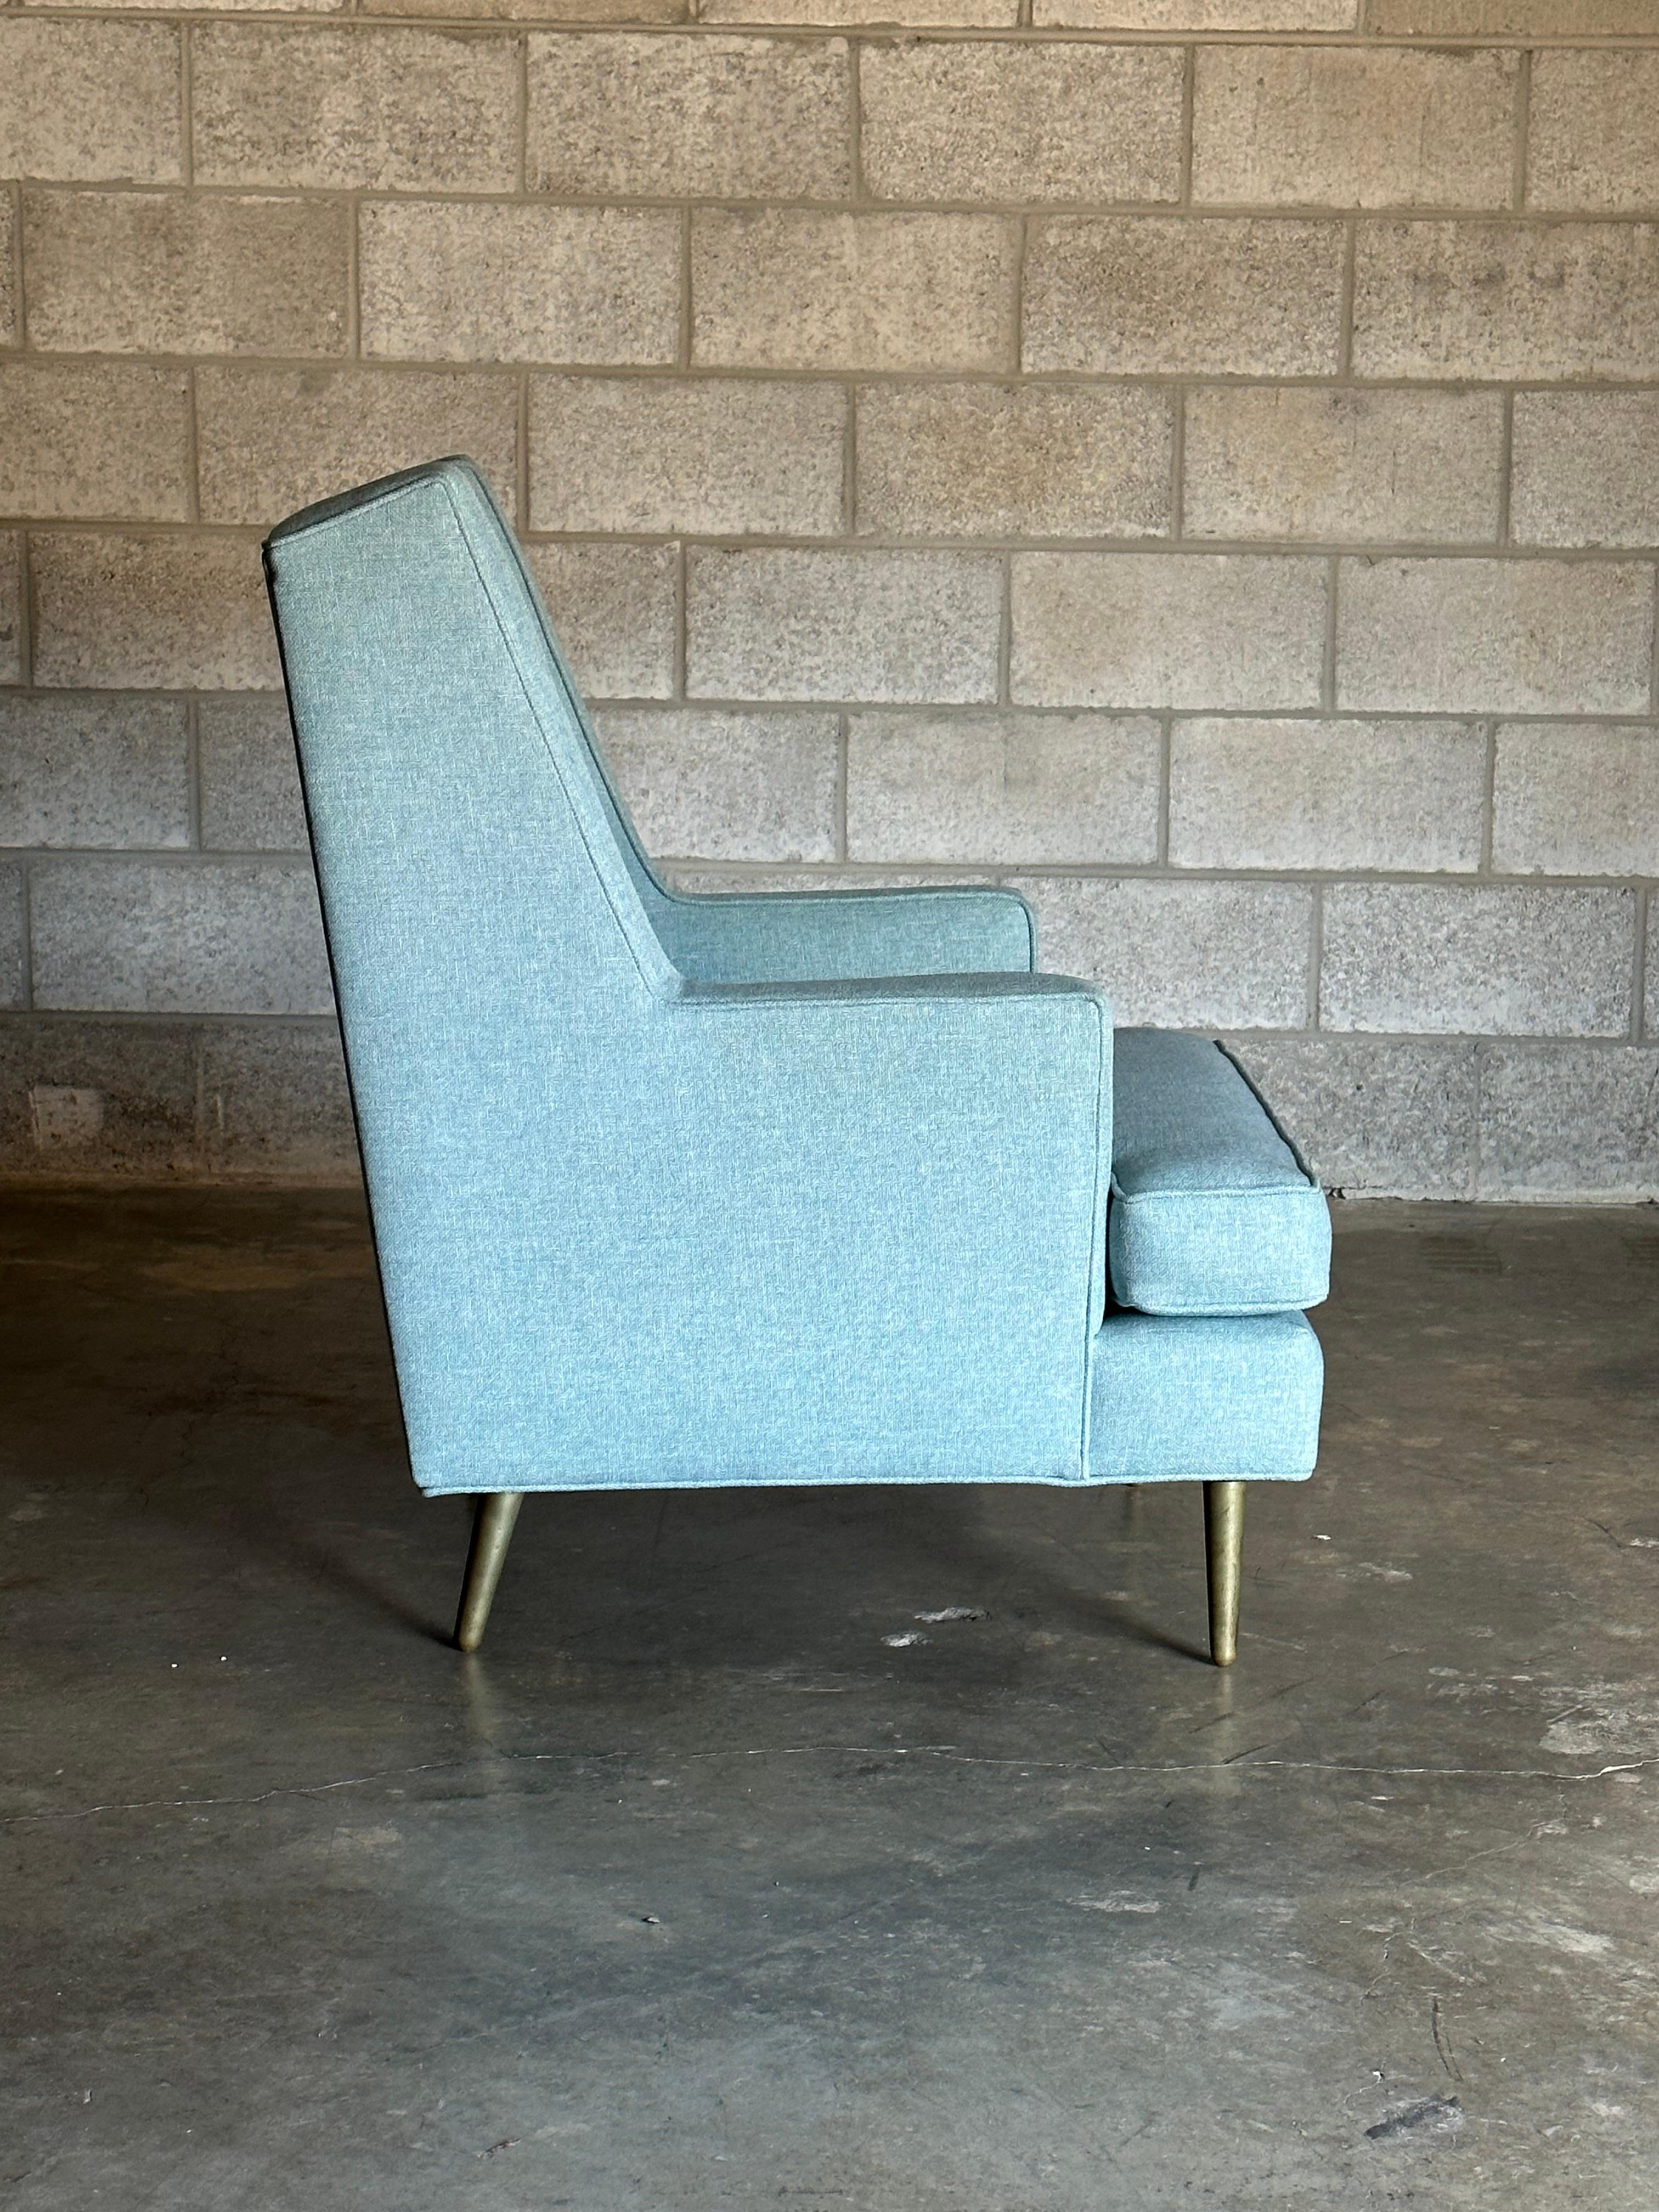 An oversized modernist take on an iconic wingback chair by iconic designer Edward Wormley for Dunbar. Features a well proportioned frame with tall seat back over solid patinated brass legs. Superb construction that Dunbar is known for. Unmarked due